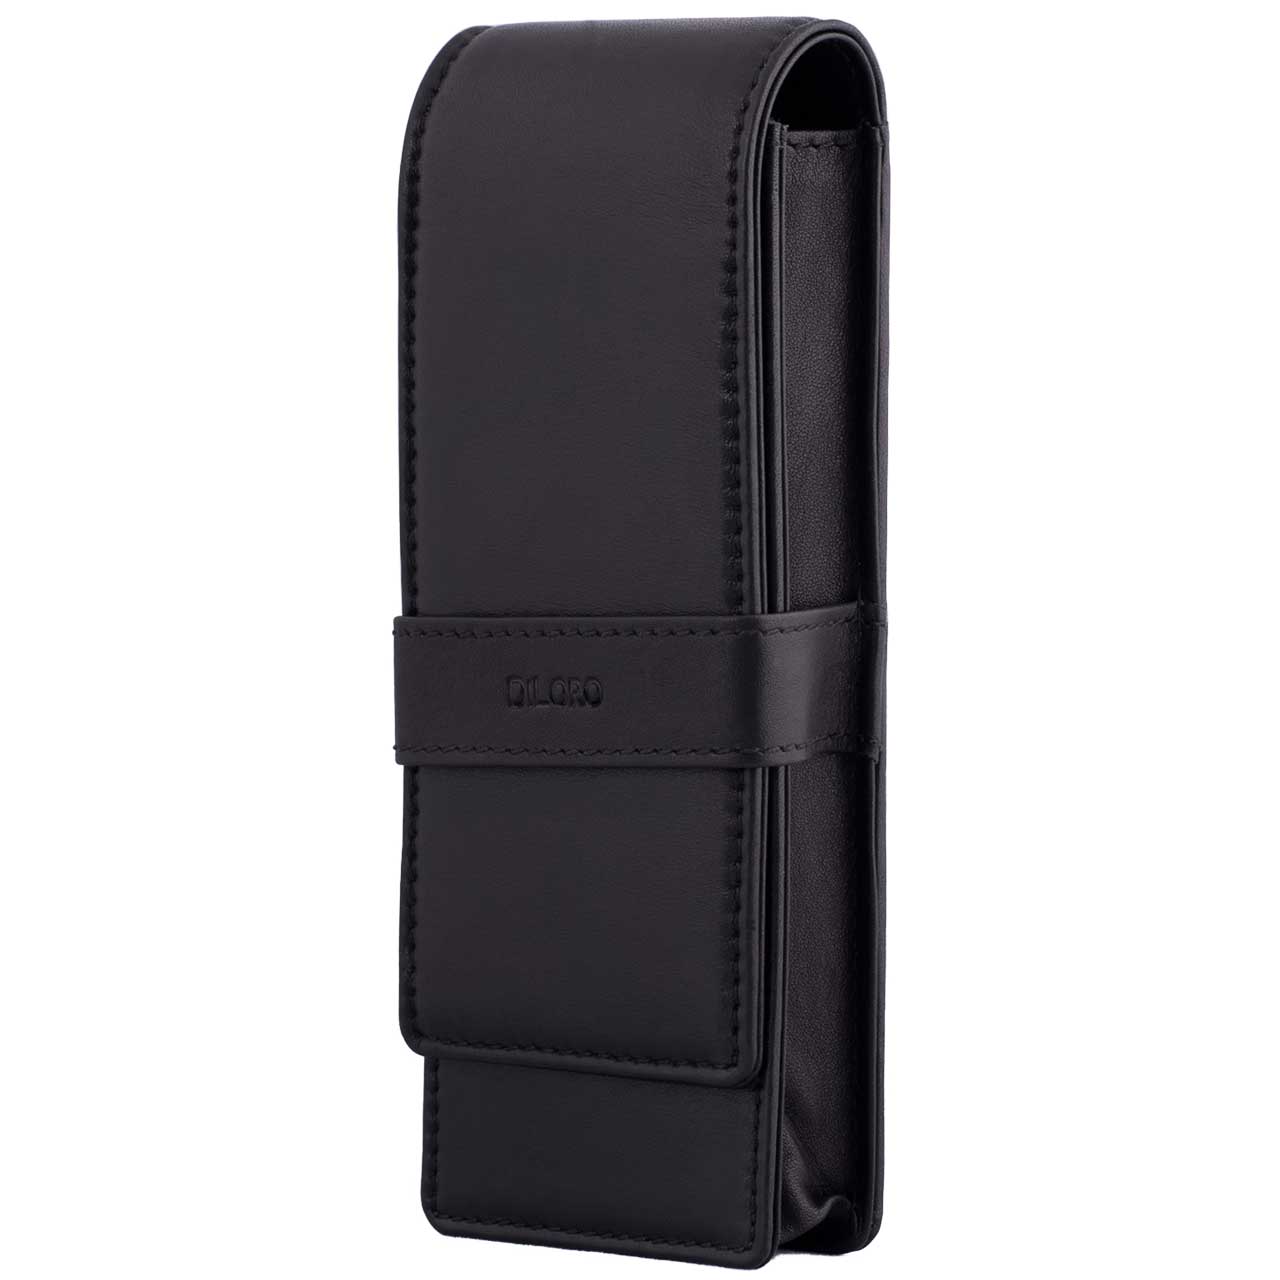 DiLoro Leather Triple Pen and Pencil Holder - Black Side 1